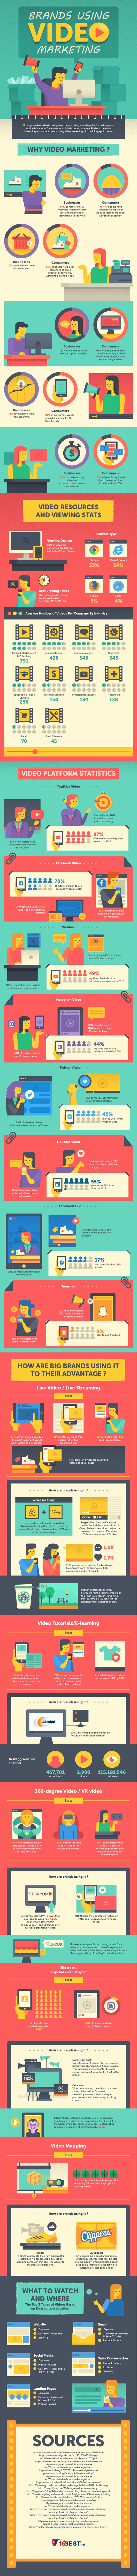 Brands Using Video Marketing (Infographic)